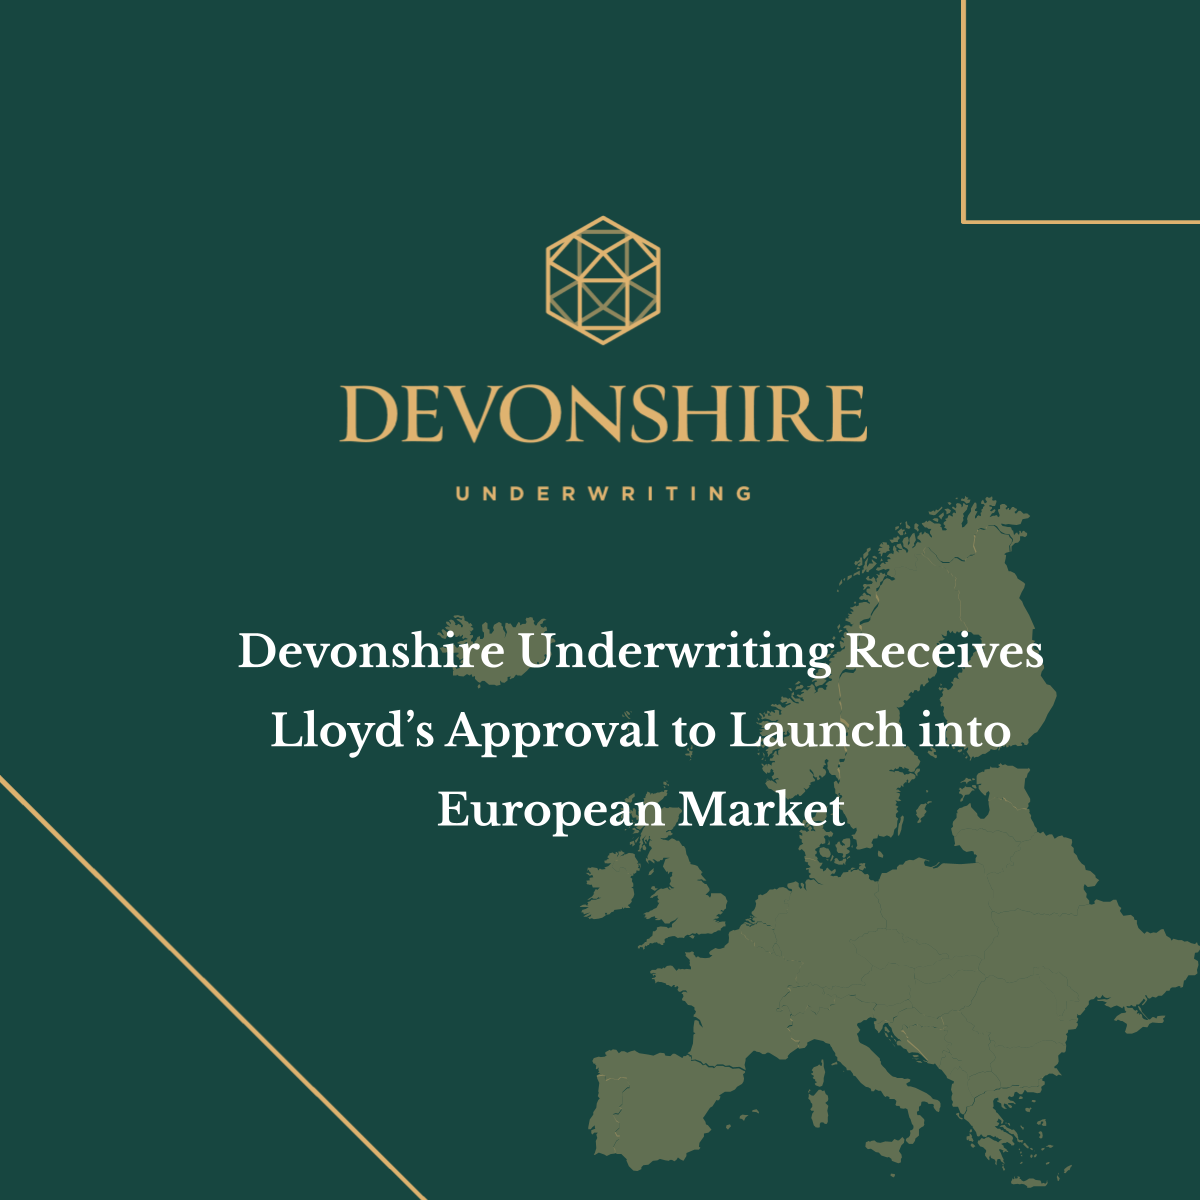 Devonshire Underwriting Receives Lloyd’s Approval to Launch into European Market